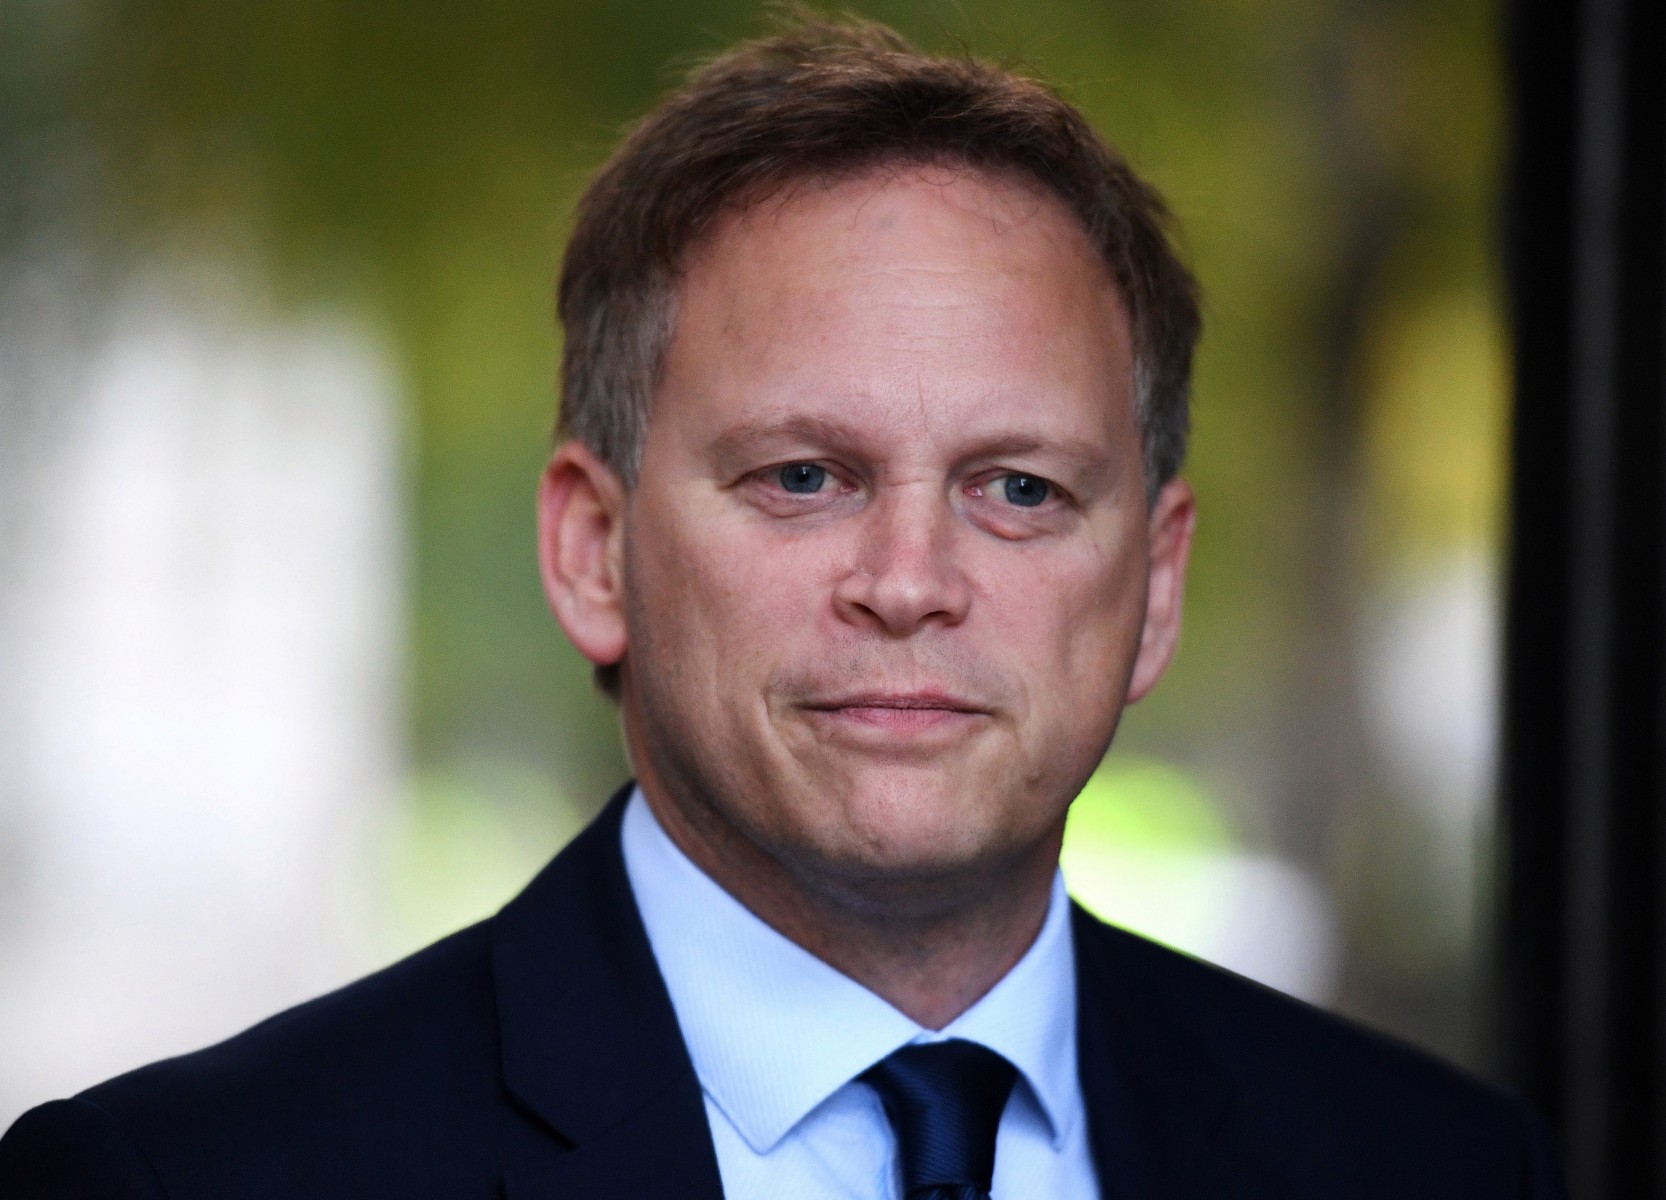 Tory Transport Secretary Grant Shapps said Labour would bring Britain to a grinding halt